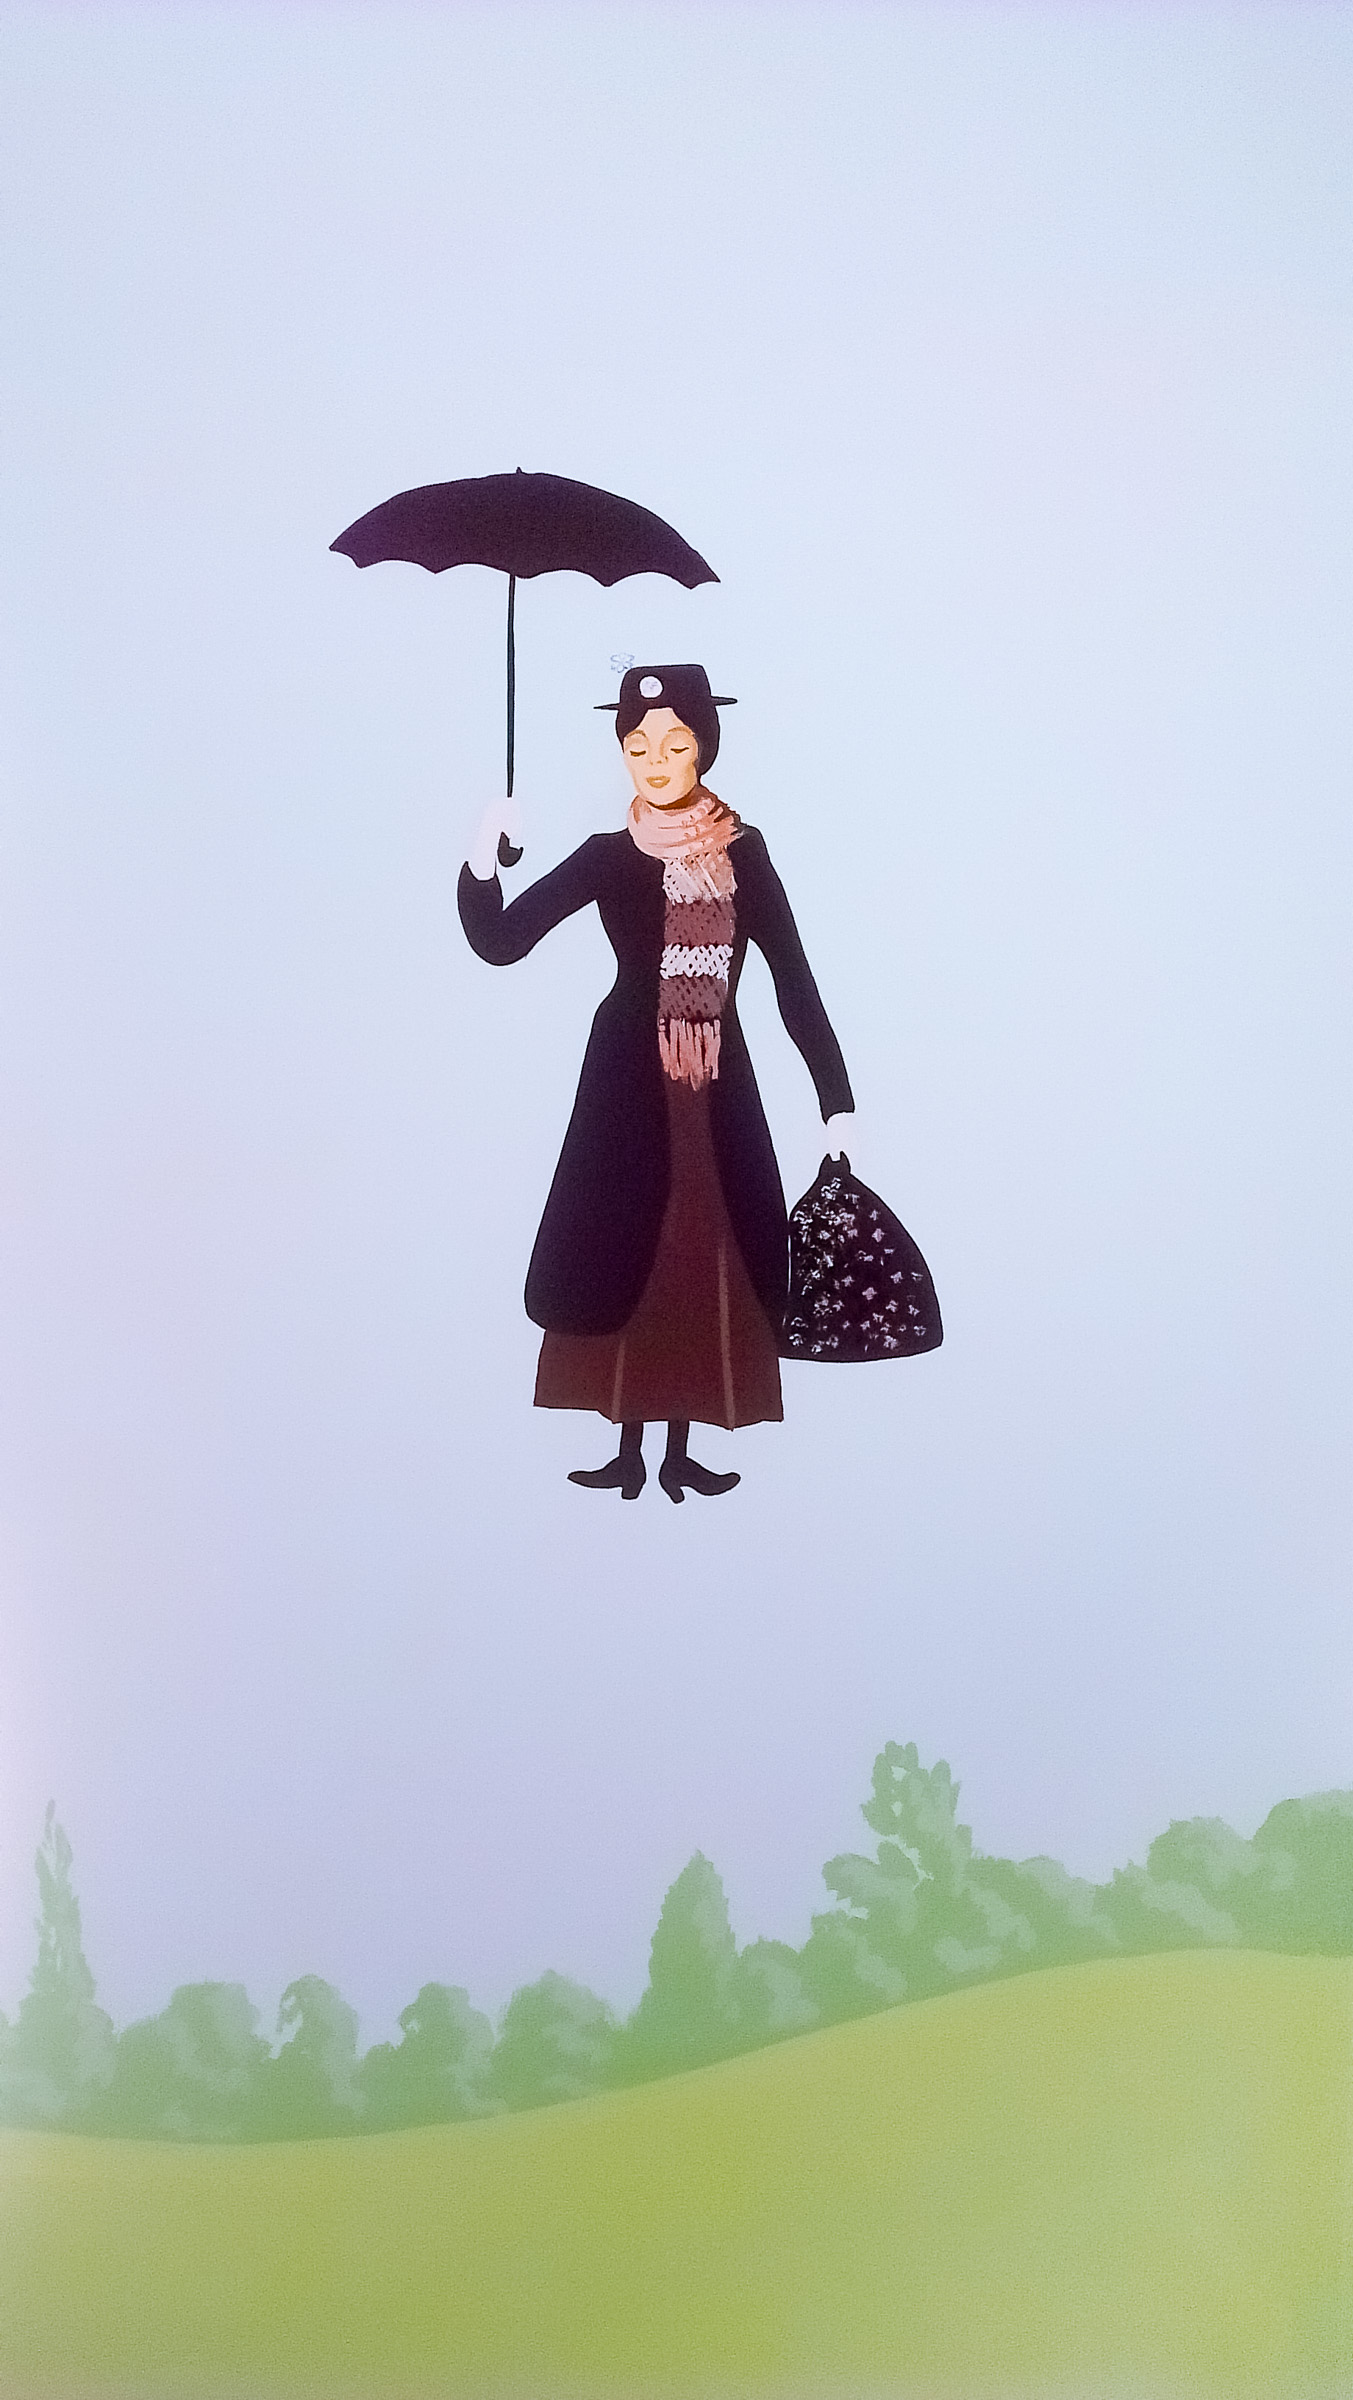 Mary Poppins flying in her practically perfect way